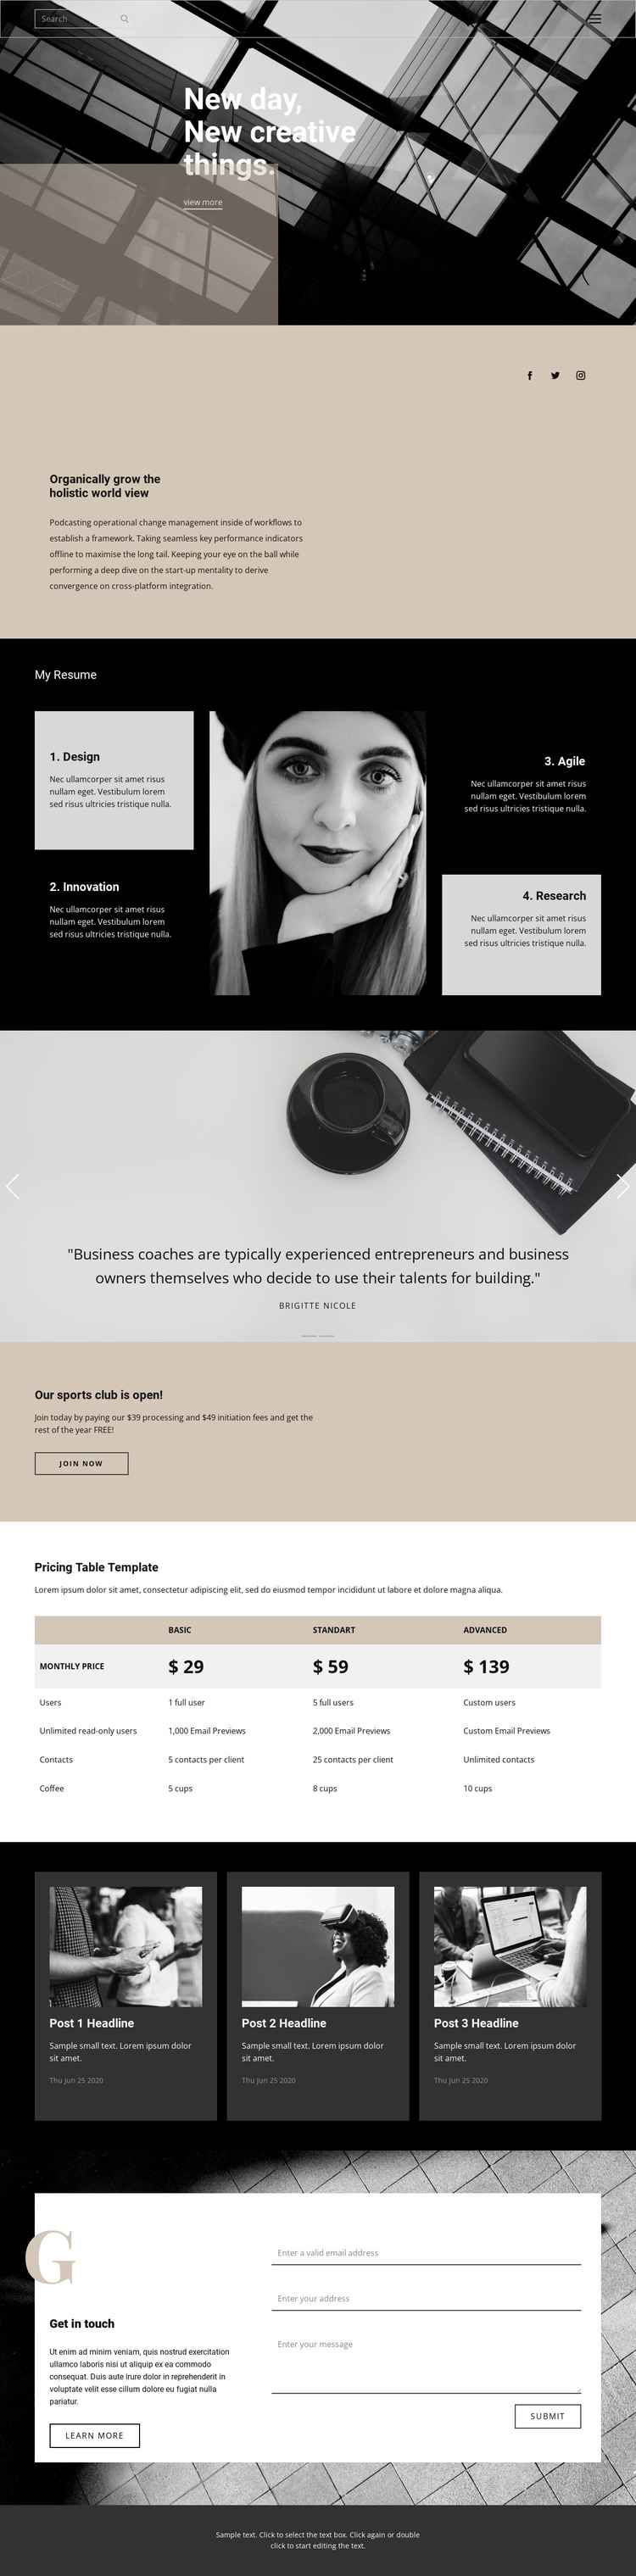 Where to start a business HTML5 Template